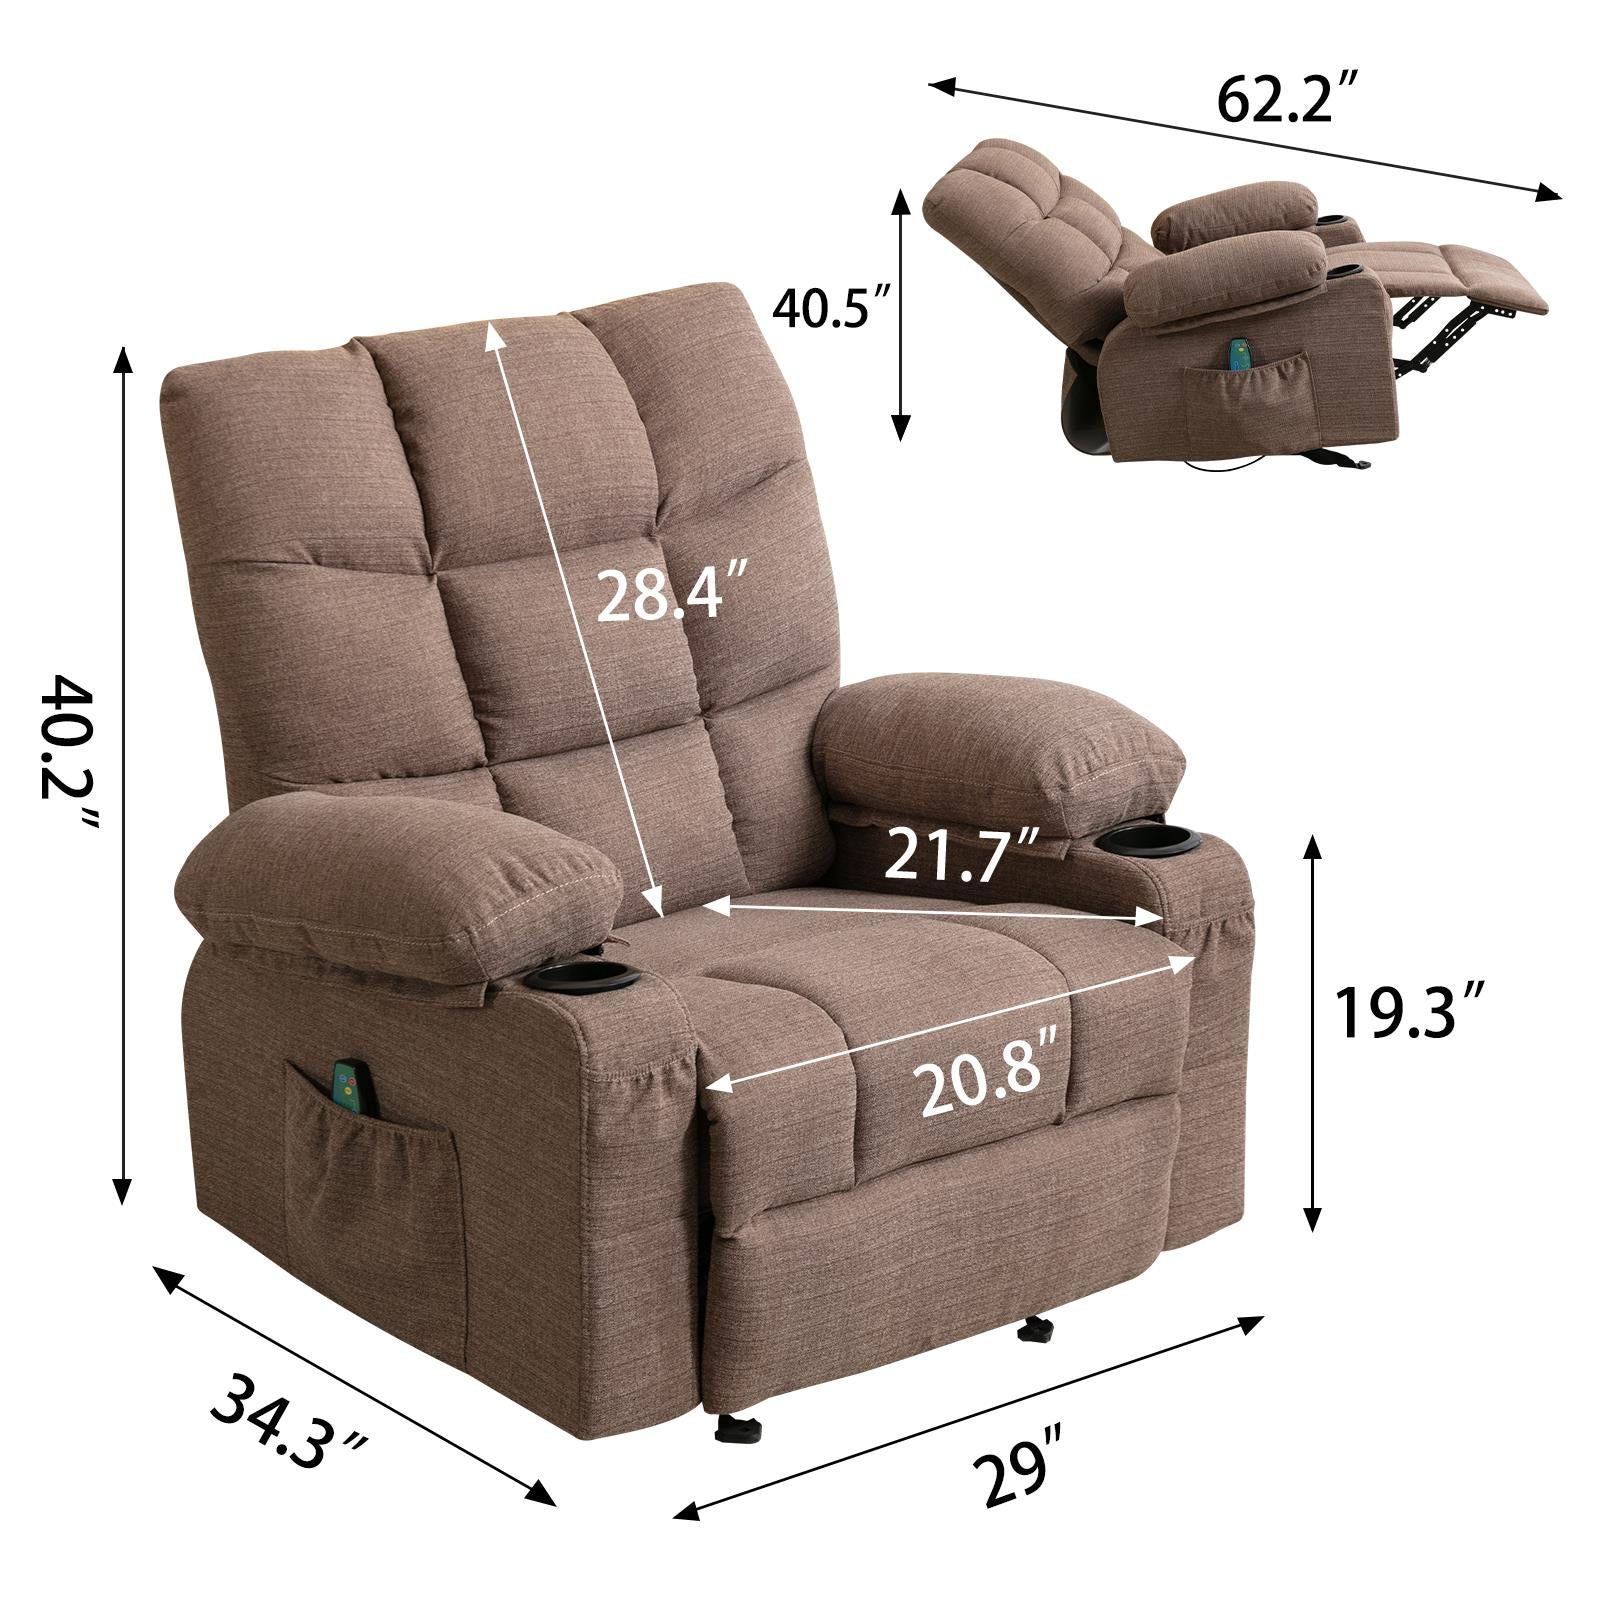 uhomepro Massage Recliner Chair, Electric Heated Power Lift